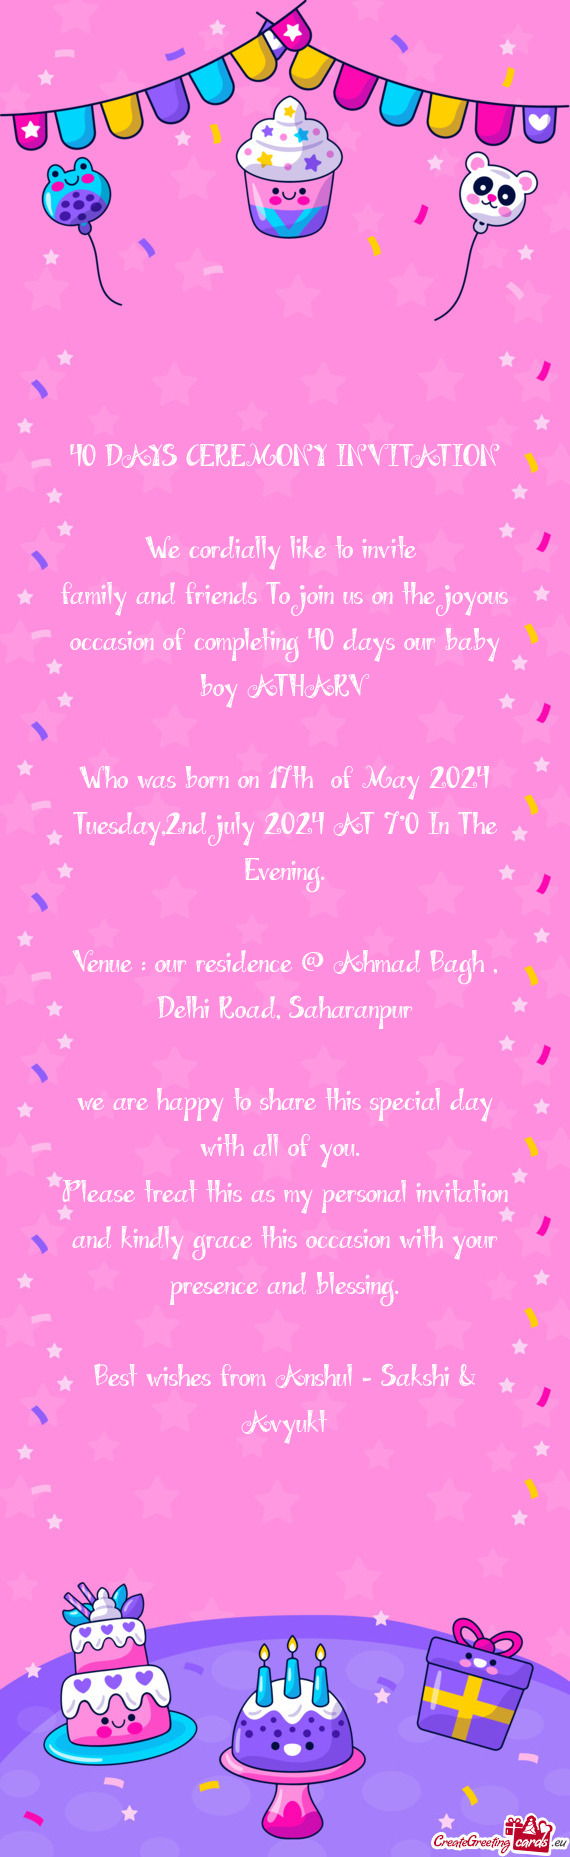 Family and friends To join us on the joyous occasion of completing 40 days our baby boy ATHARV